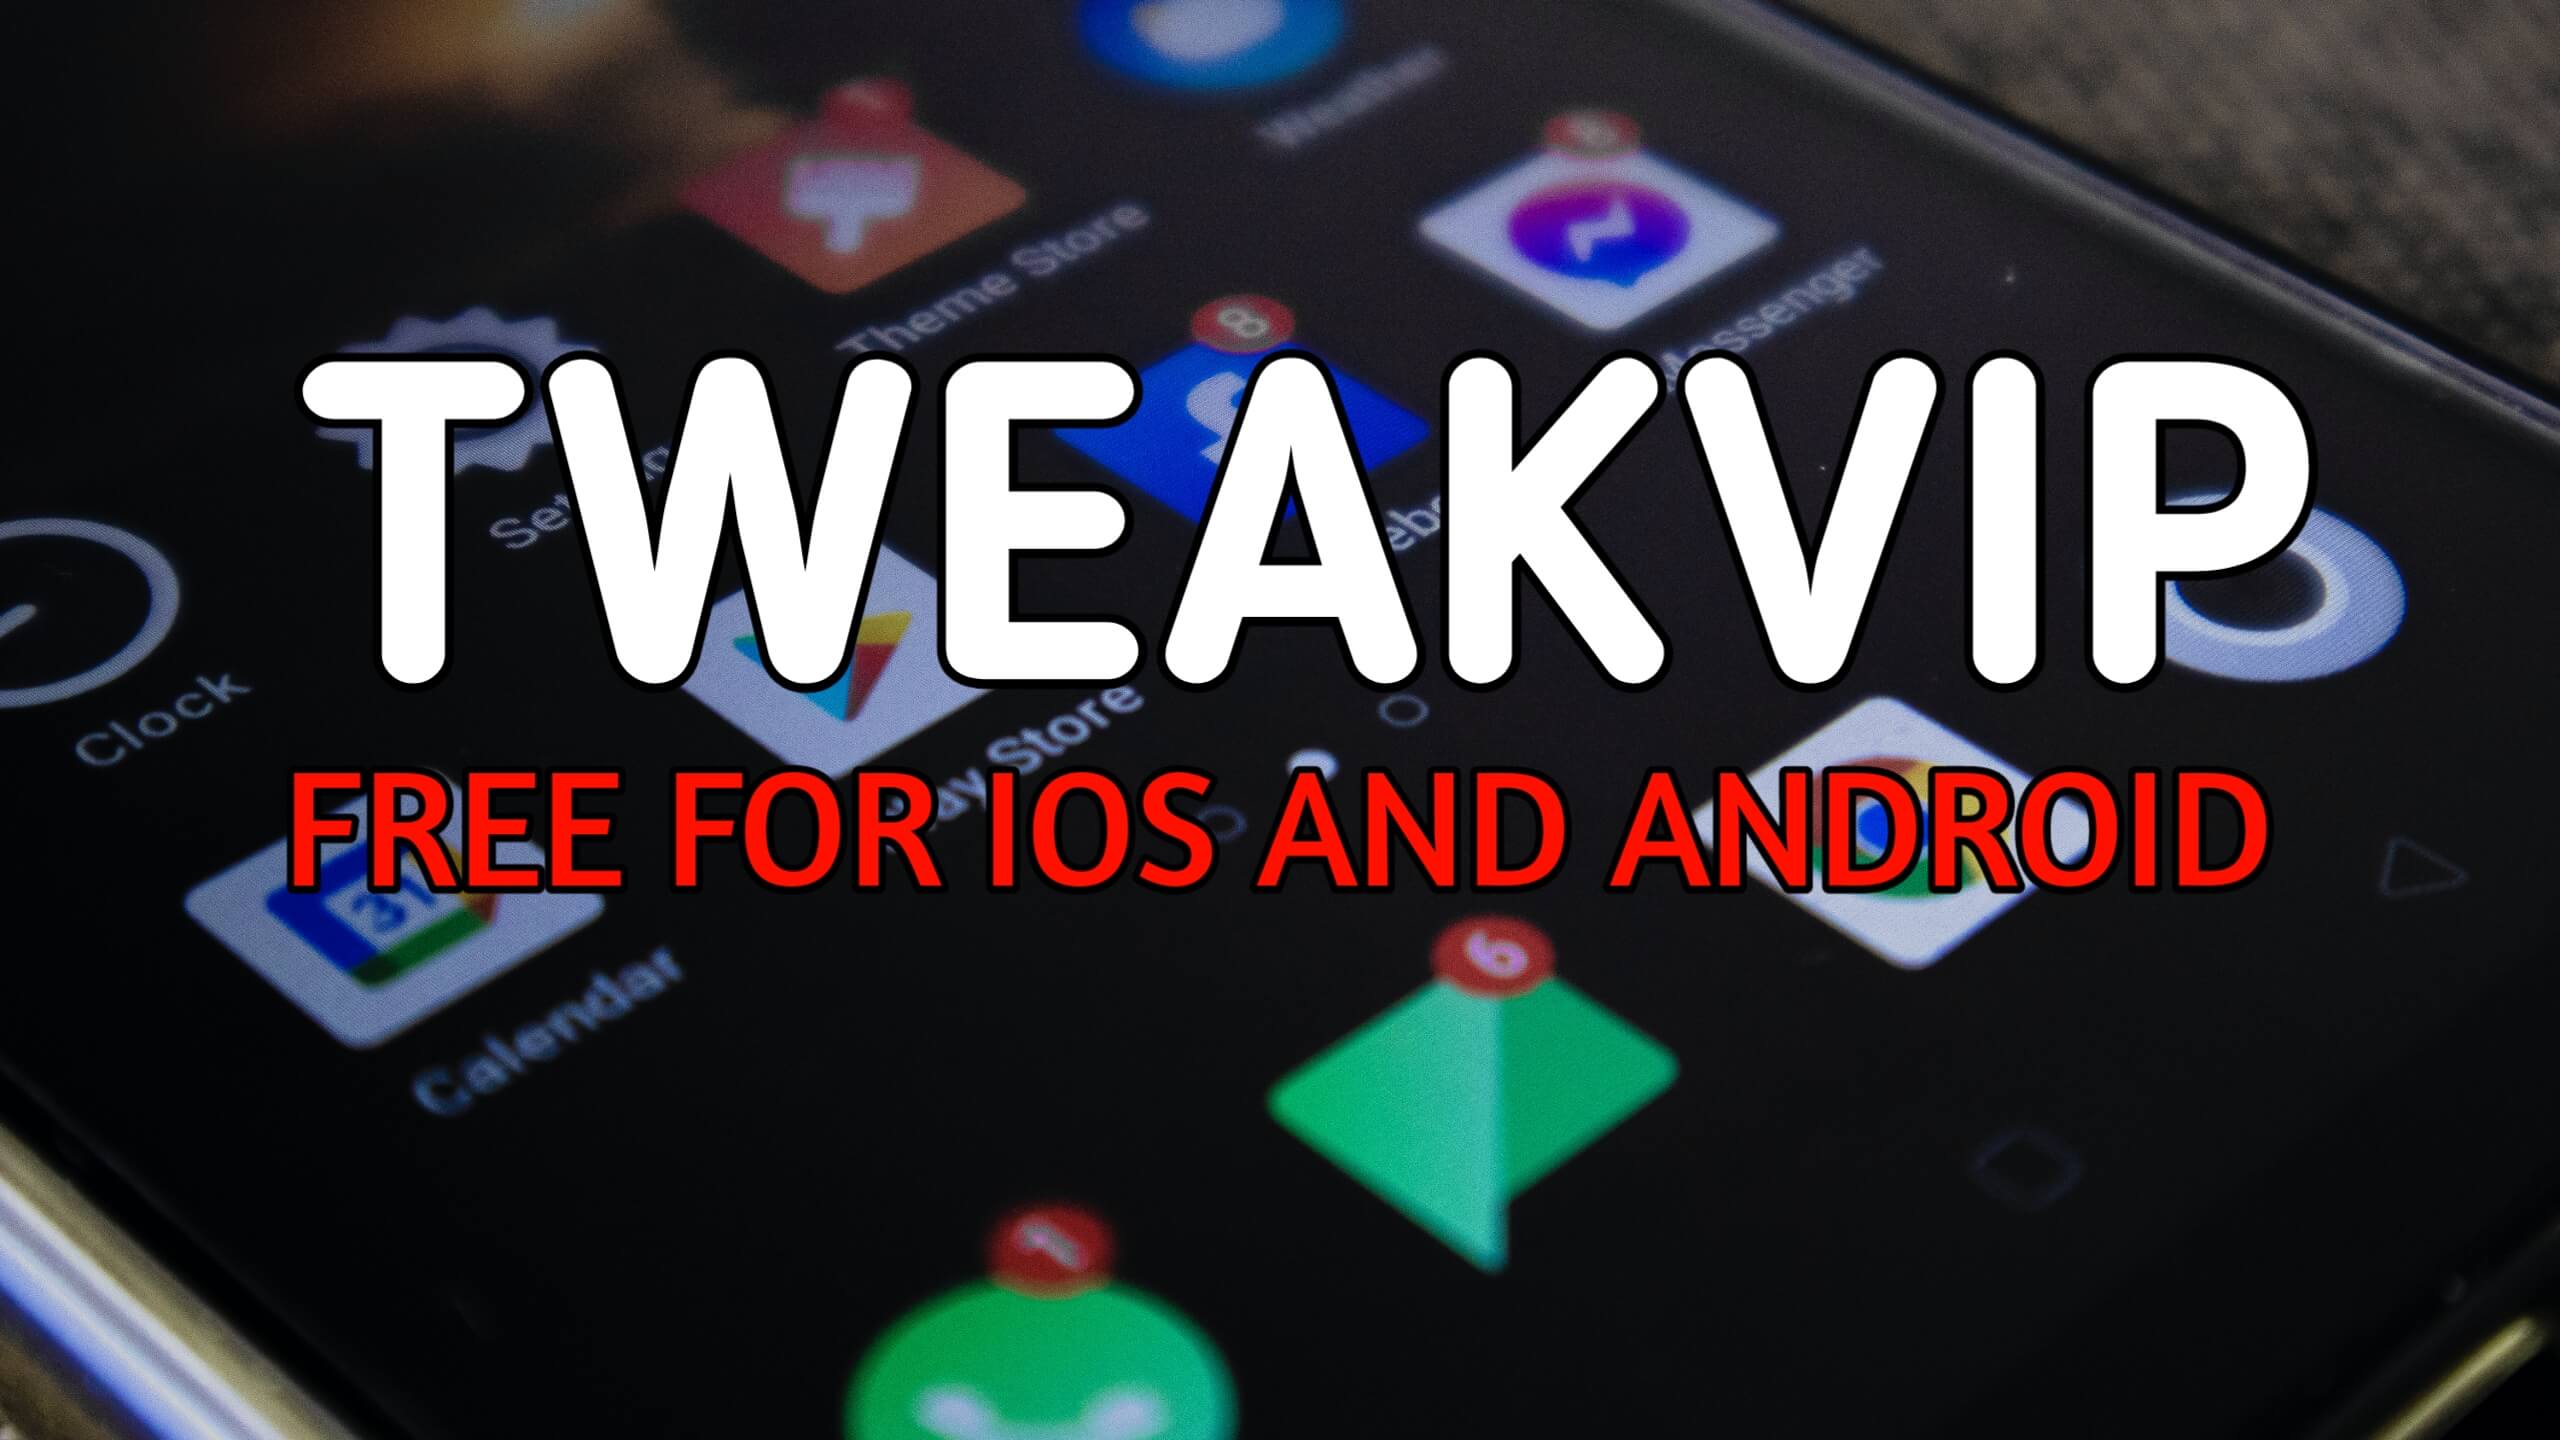 Tweakvip com : Safe Free mod Games and Apks ( IOS and Android )